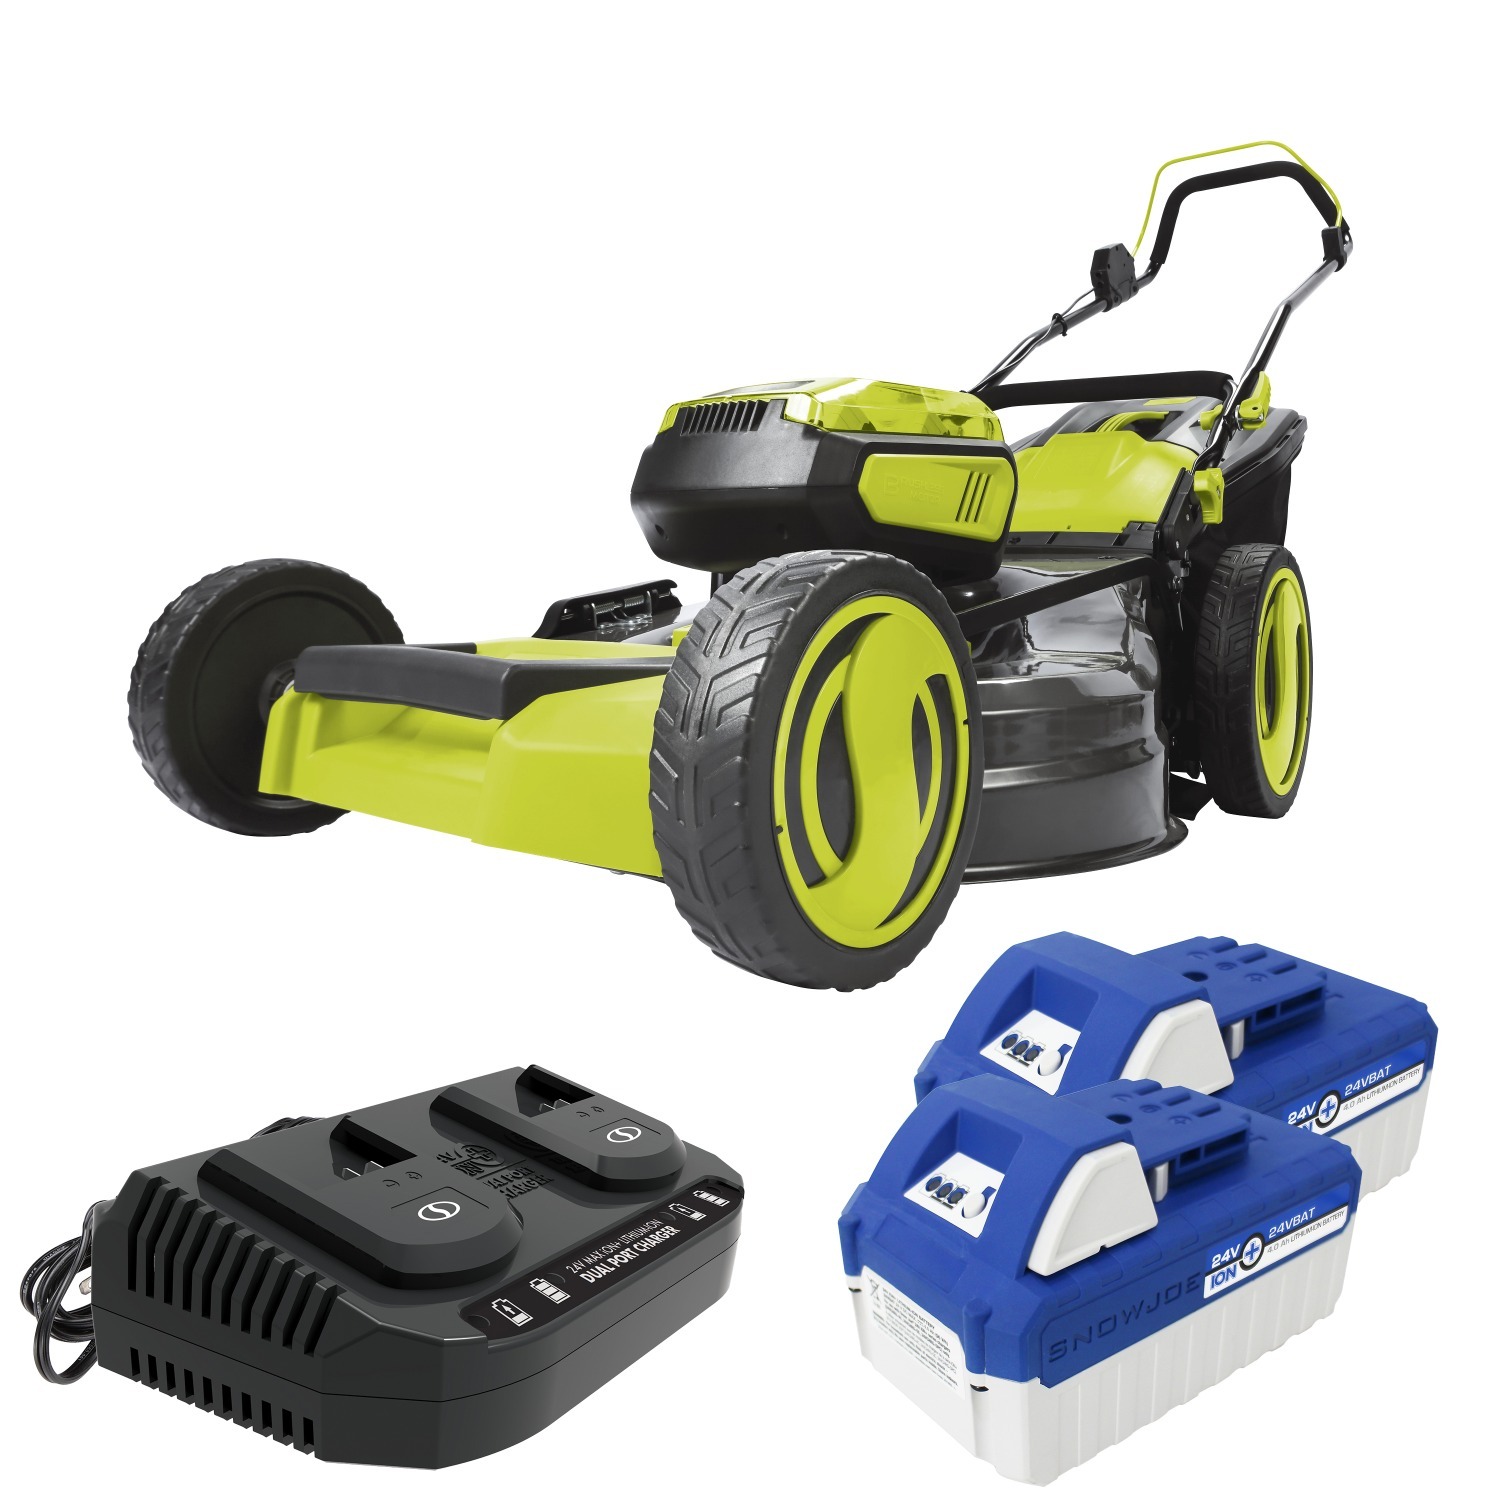 21" Sun Joe 24V-X2-21LM 48-Volt iON+ Cordless Lawn Mower Kit + 2 x 4.0-Ah Batteries, Dual Port Charger & Collection Bag $178+ Free Shipping